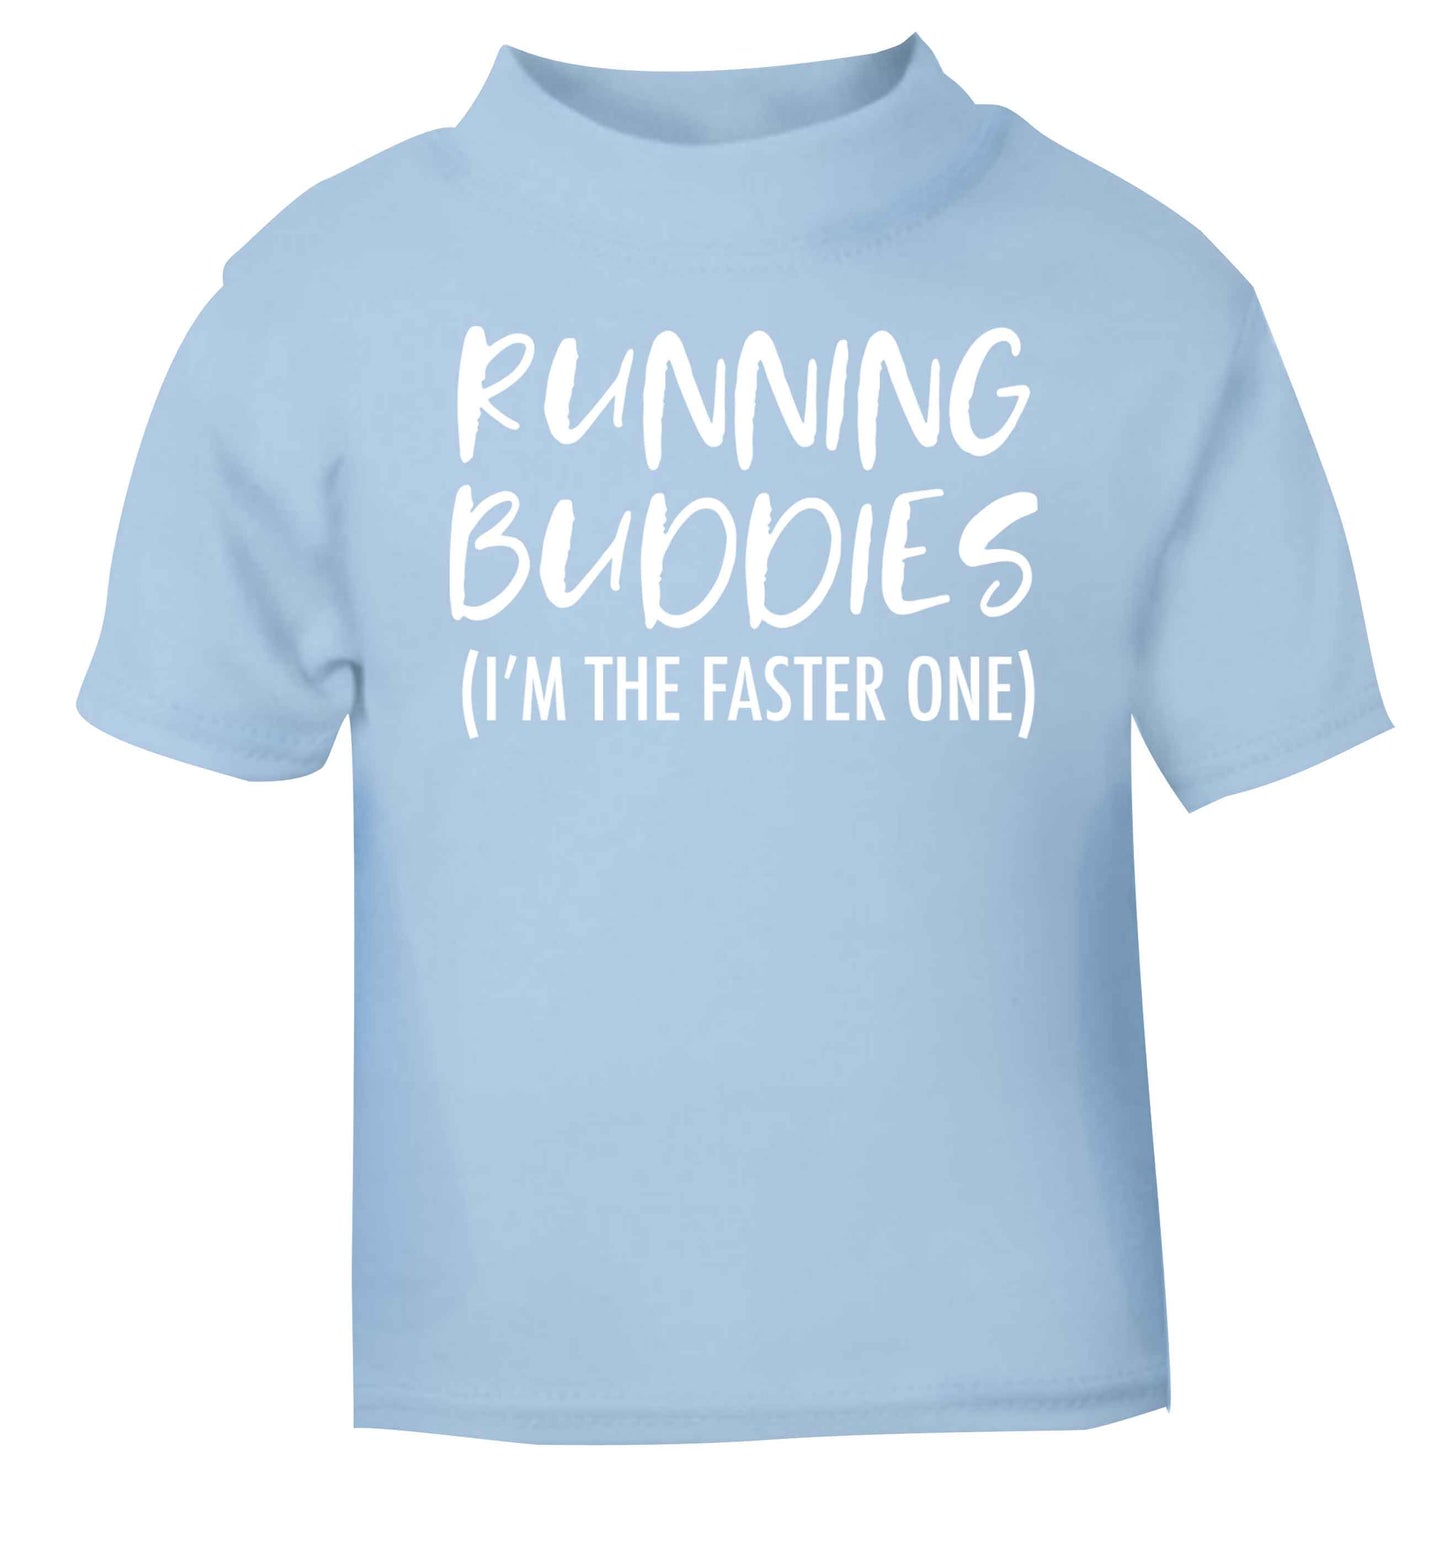 Running buddies (I'm the faster one) light blue baby toddler Tshirt 2 Years